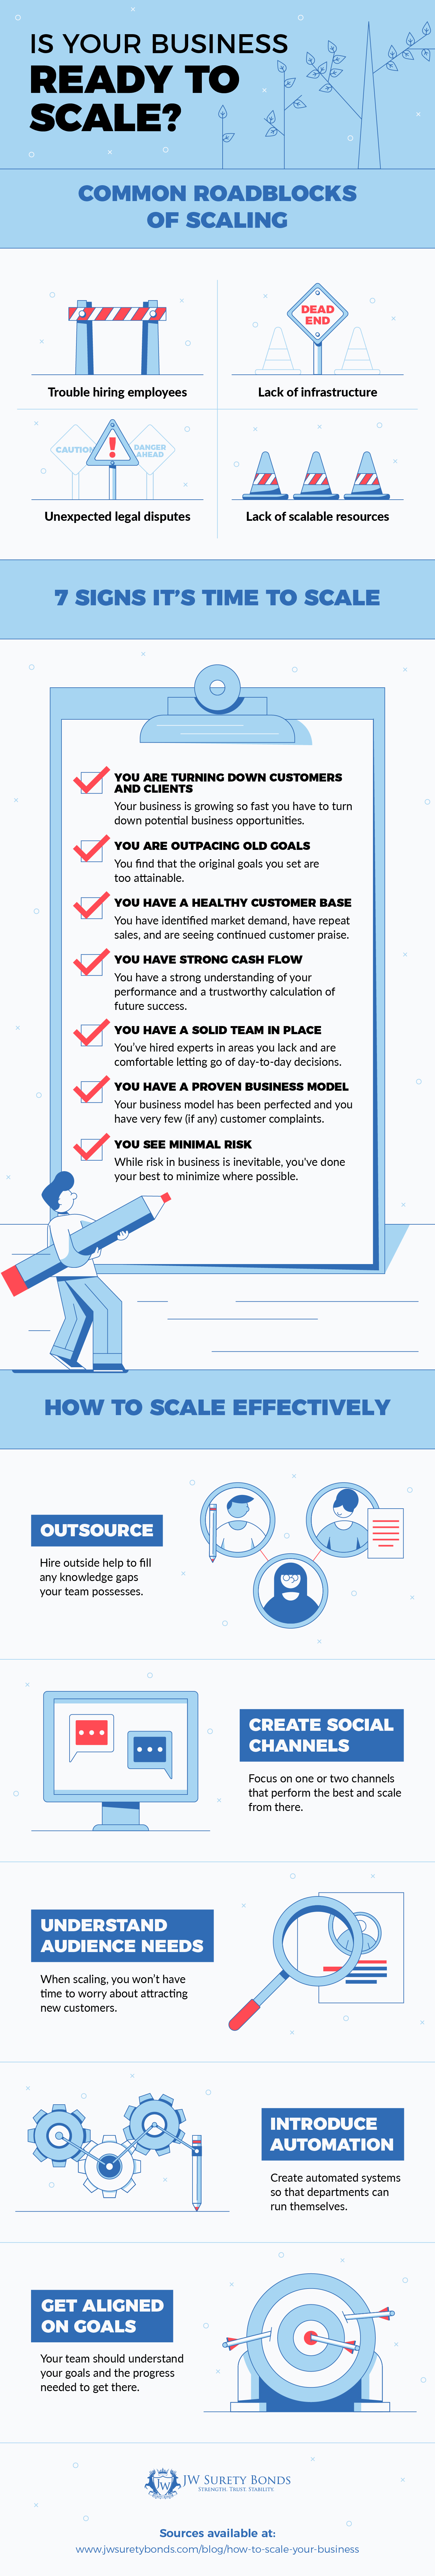 is your business ready to scale infographic